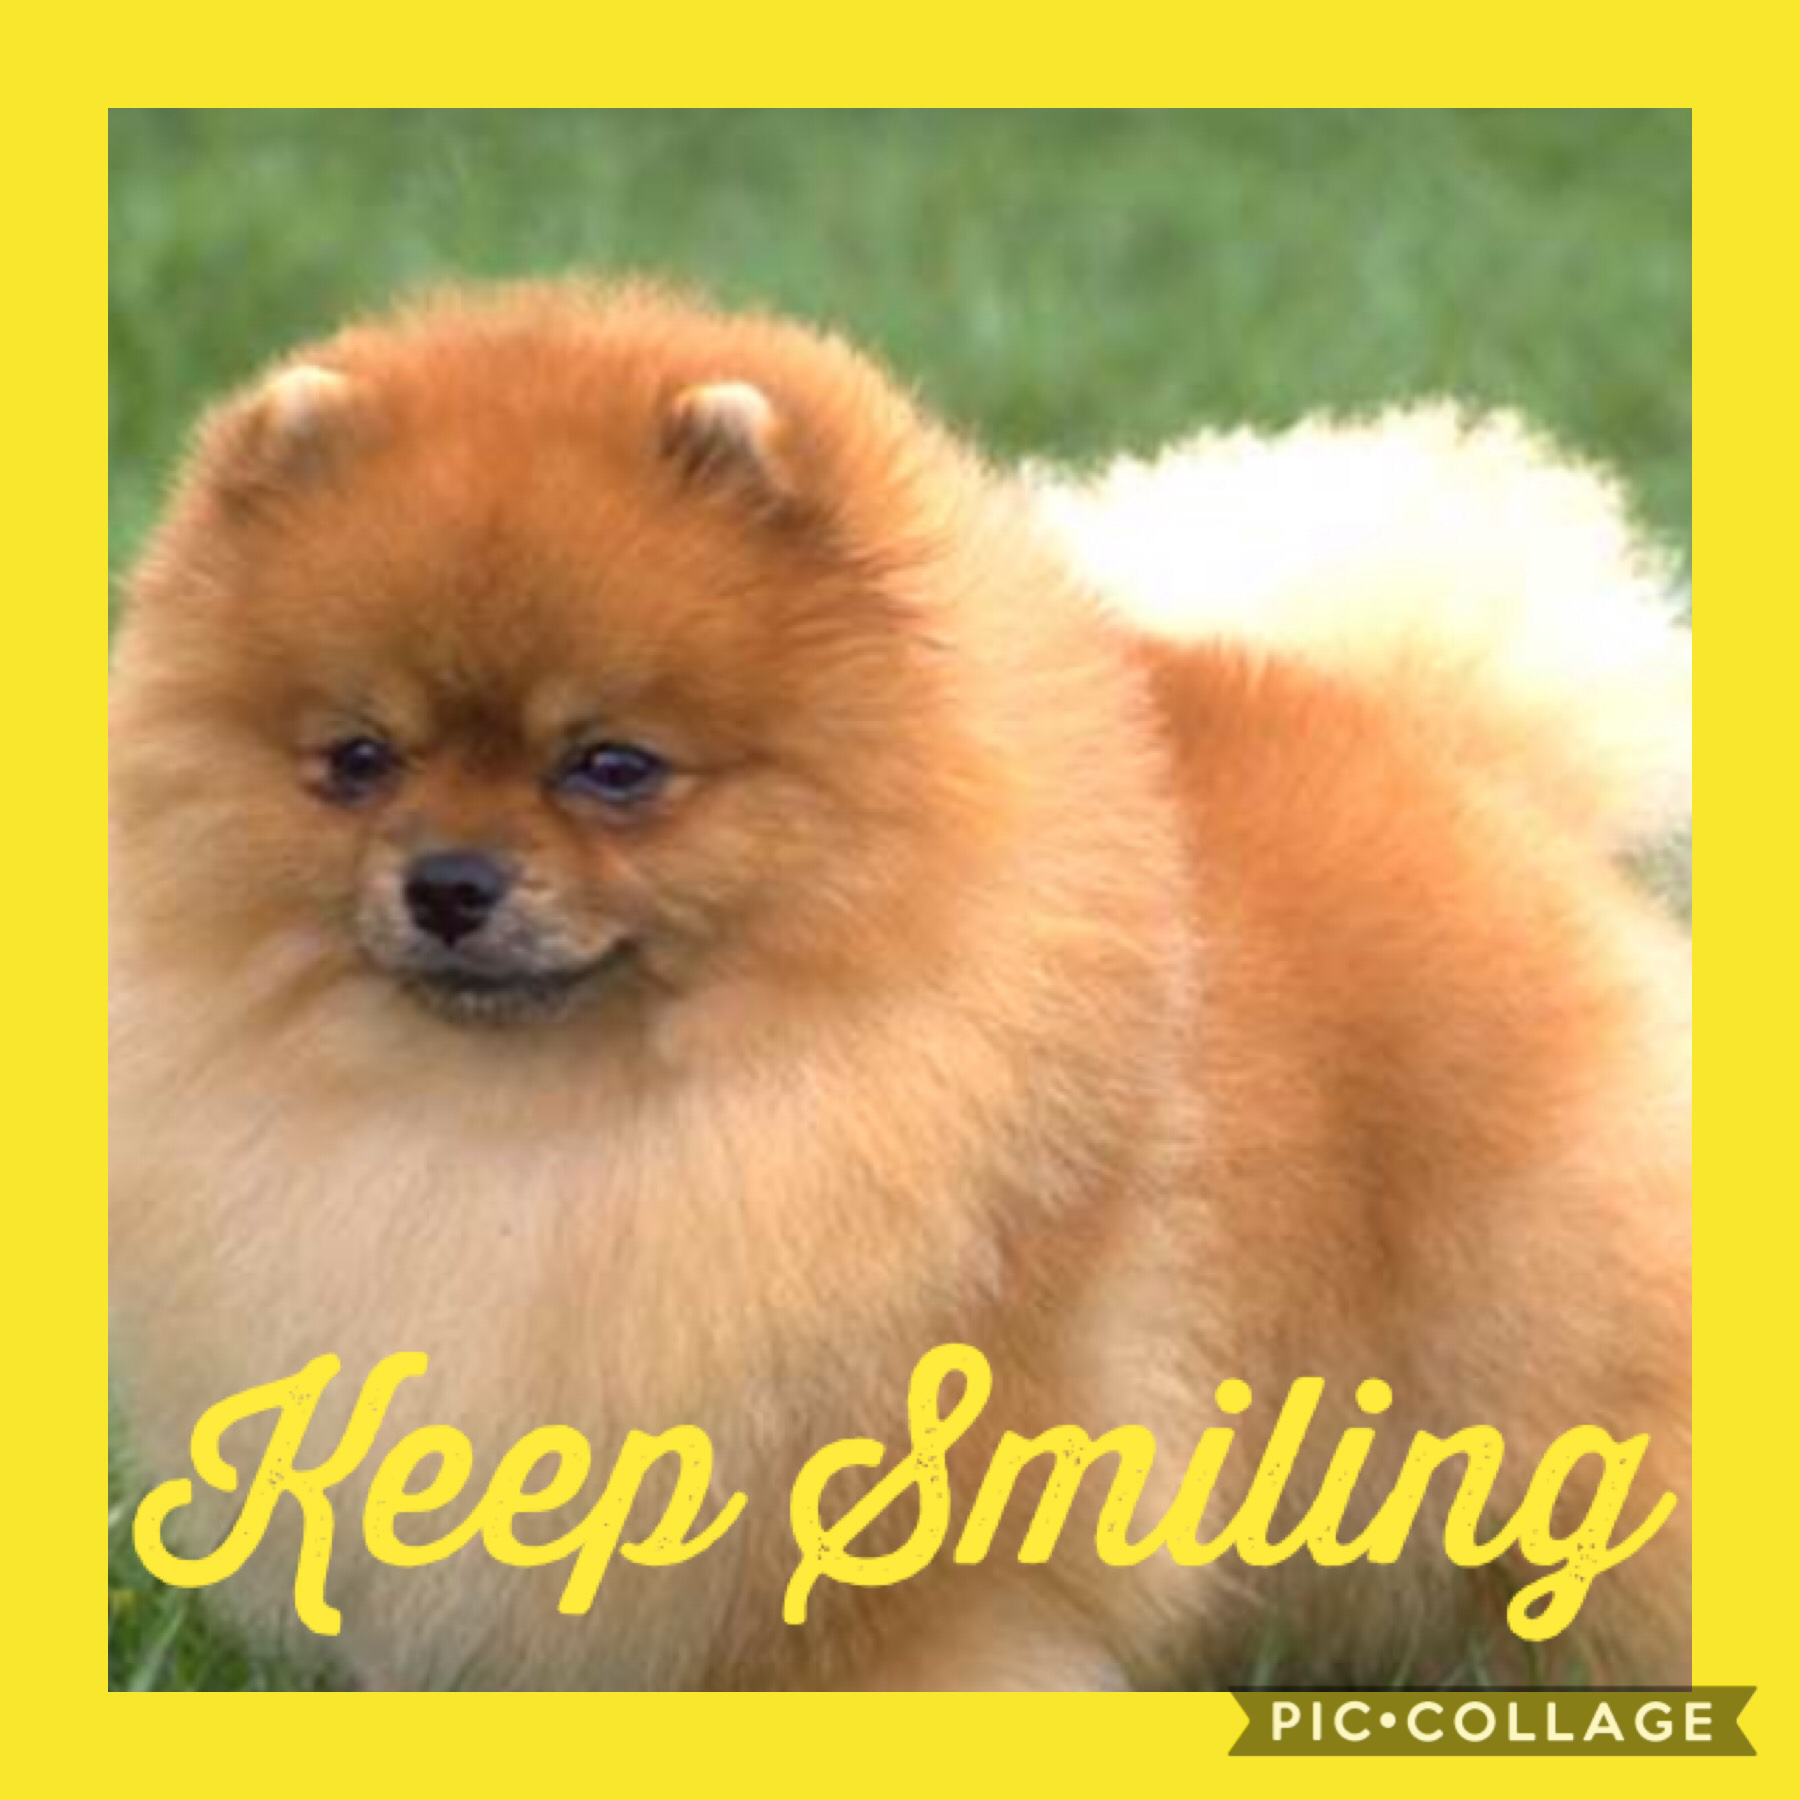 So love poms if you comment on my post I will look follow and comment on yours